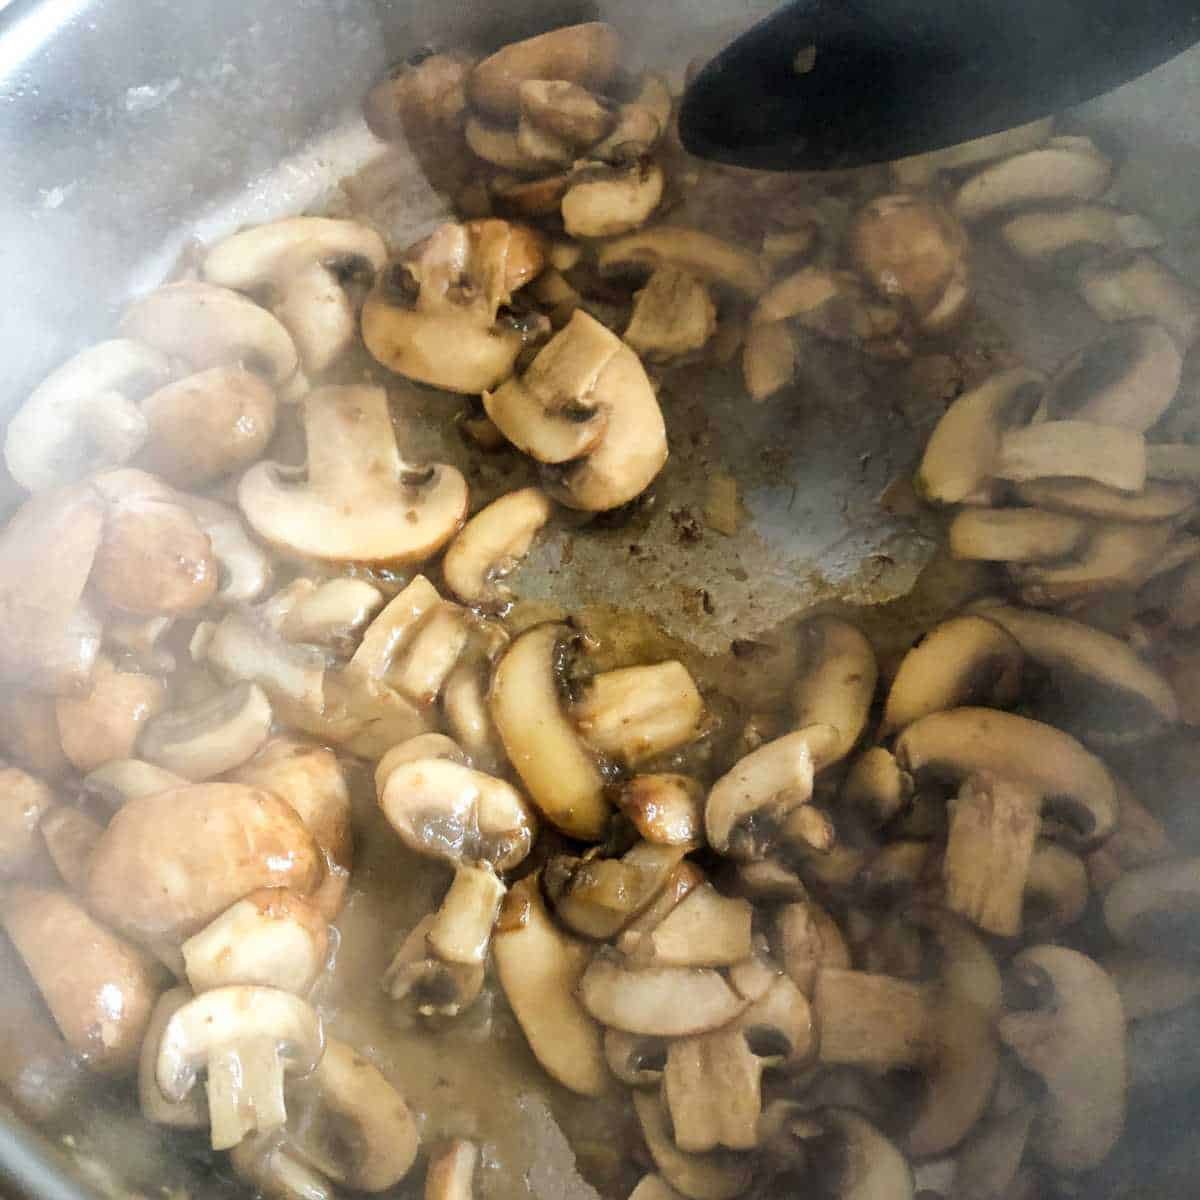 Cooked sliced mushrooms in a skillet